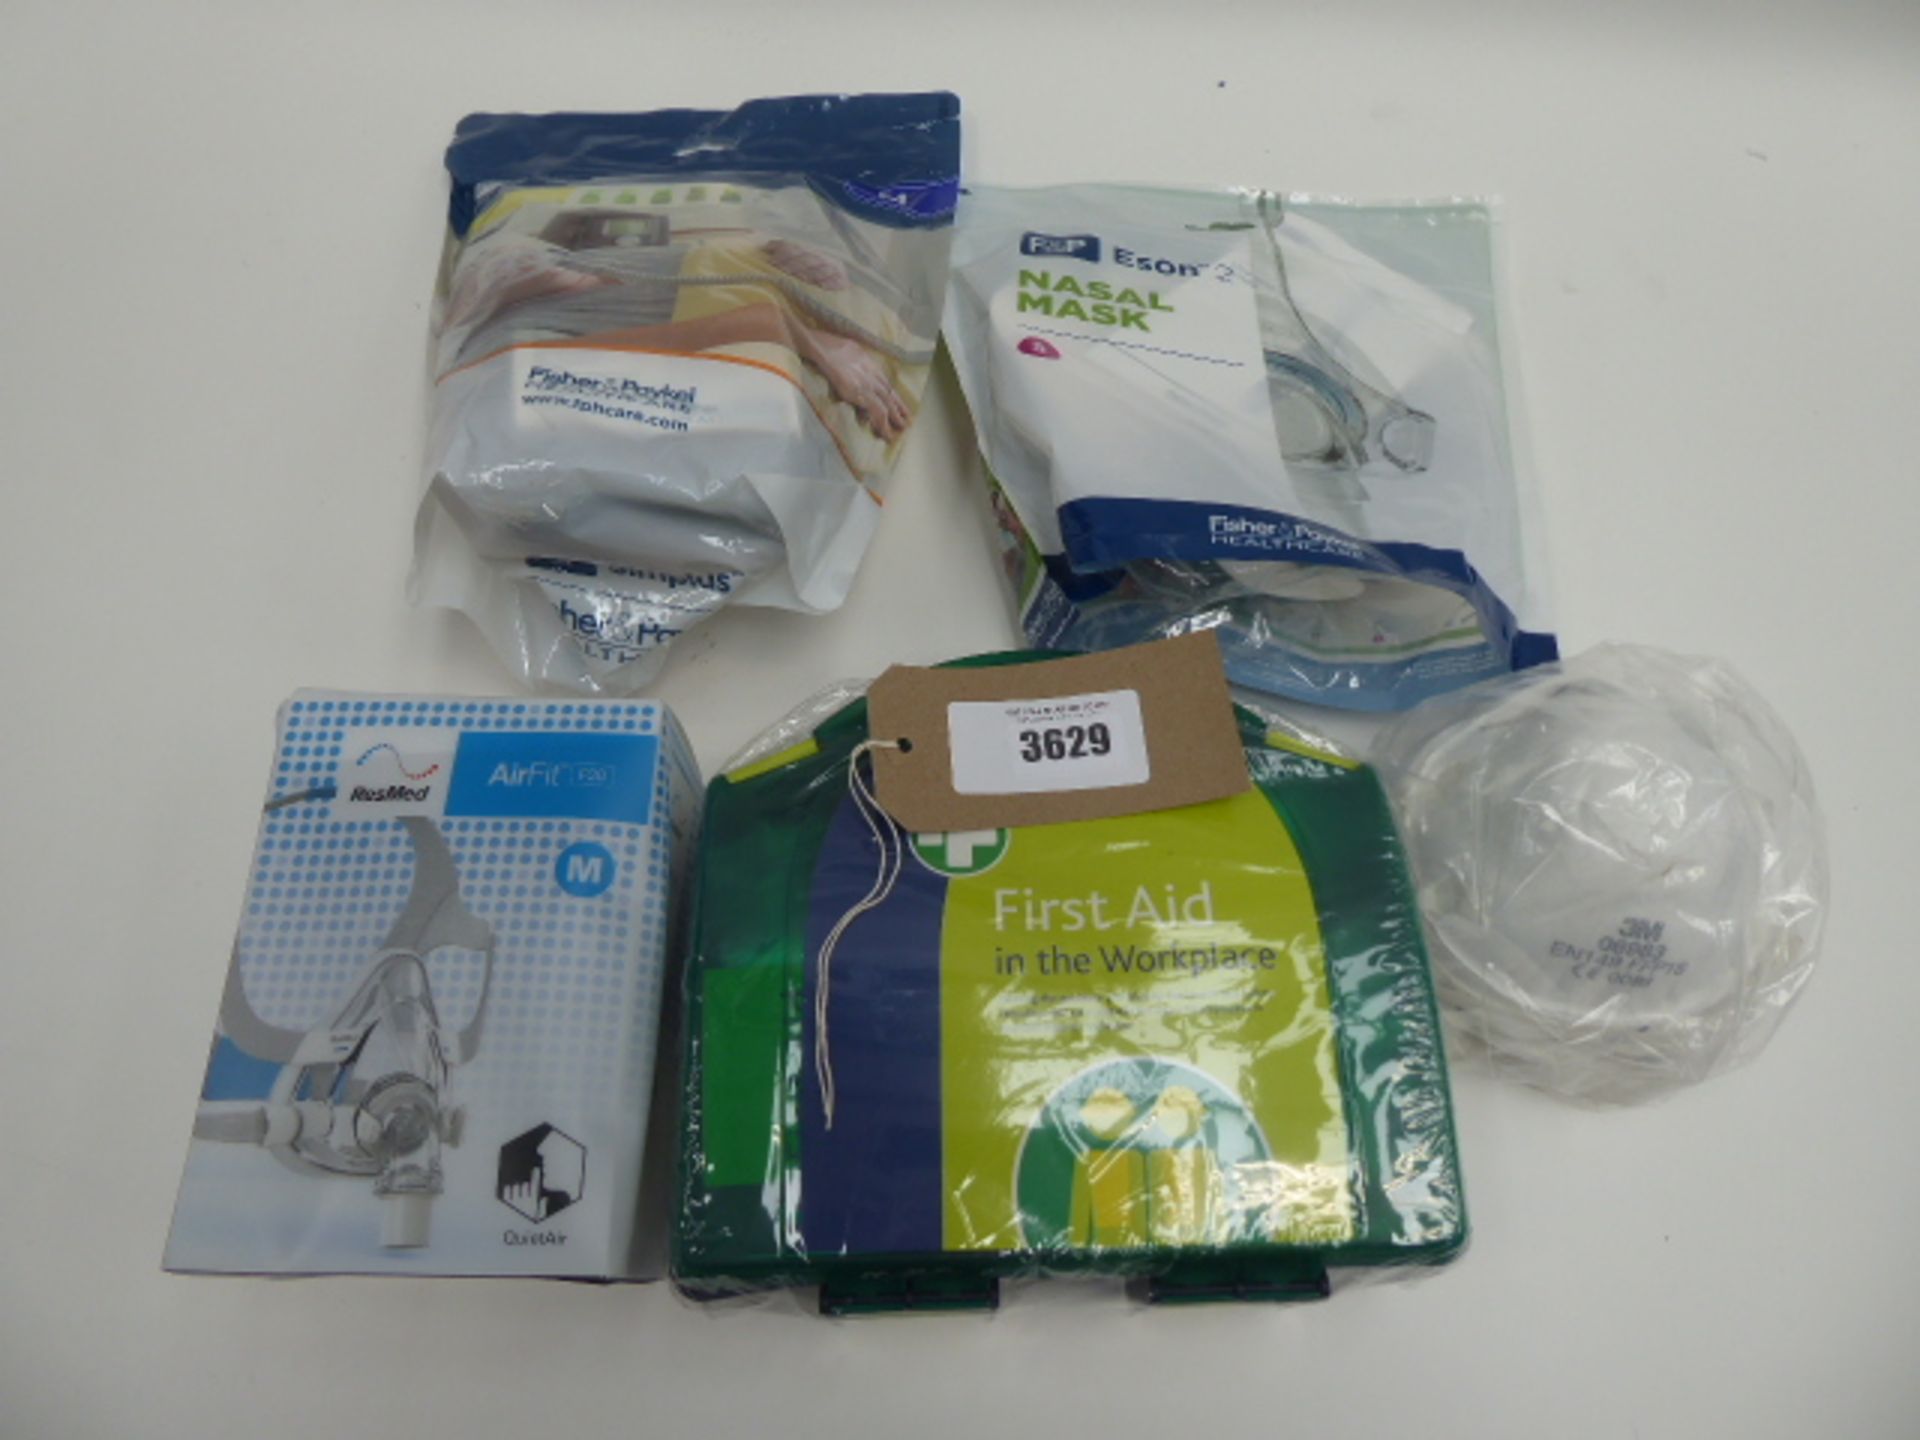 Bag containing CPAP masks (ResMed AirFit, F&P nasal mask, F&P Simplus ), 3M masks and first aid kit